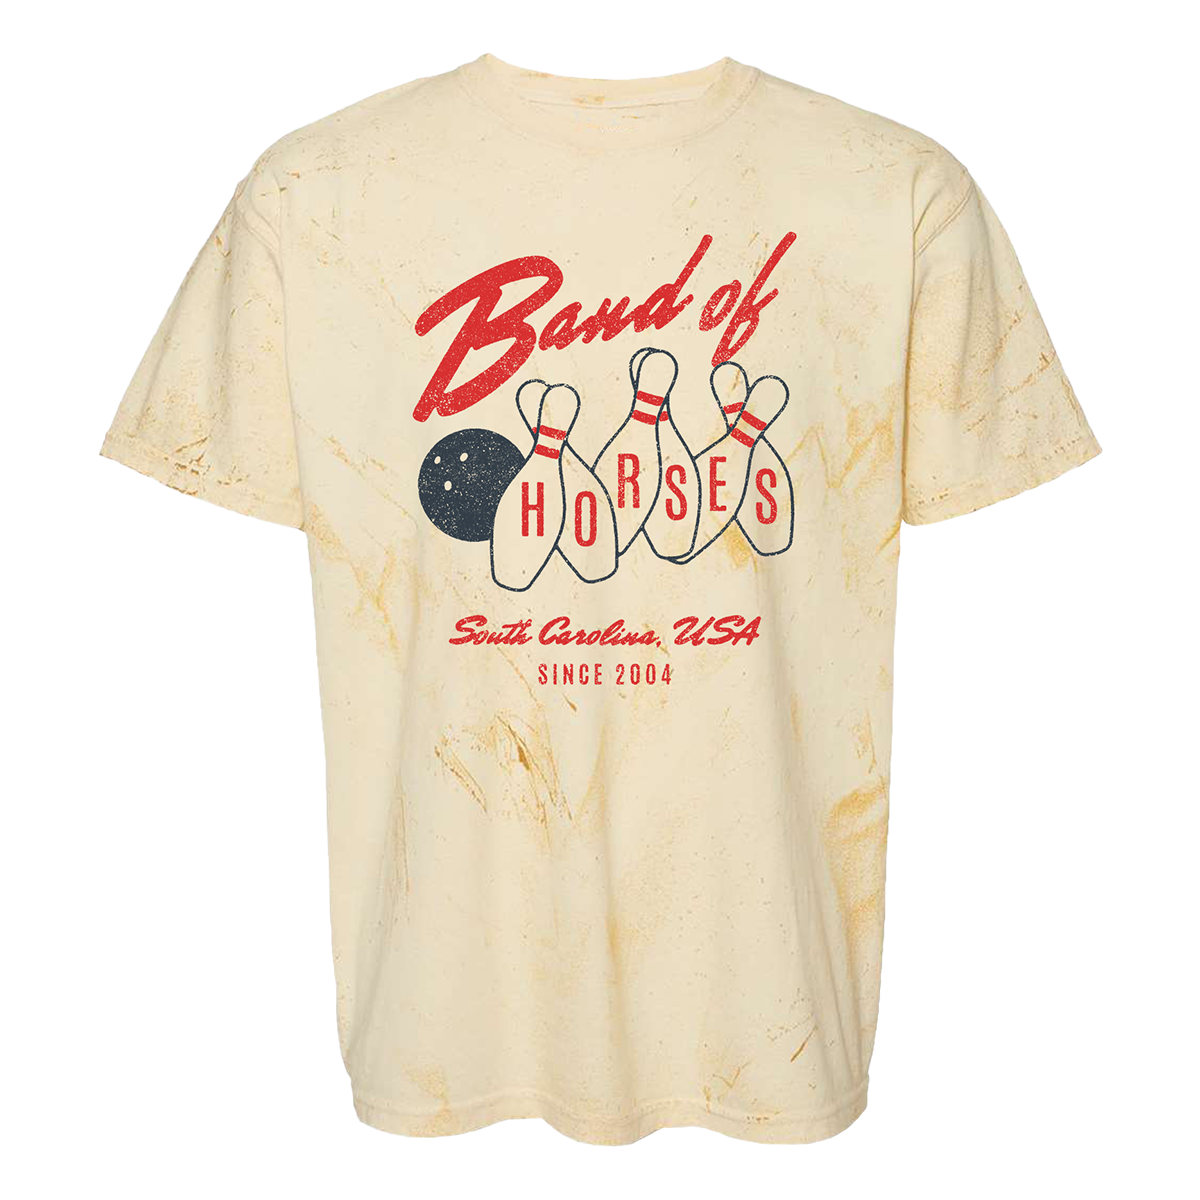 Bowling Alley Colorblast Tee